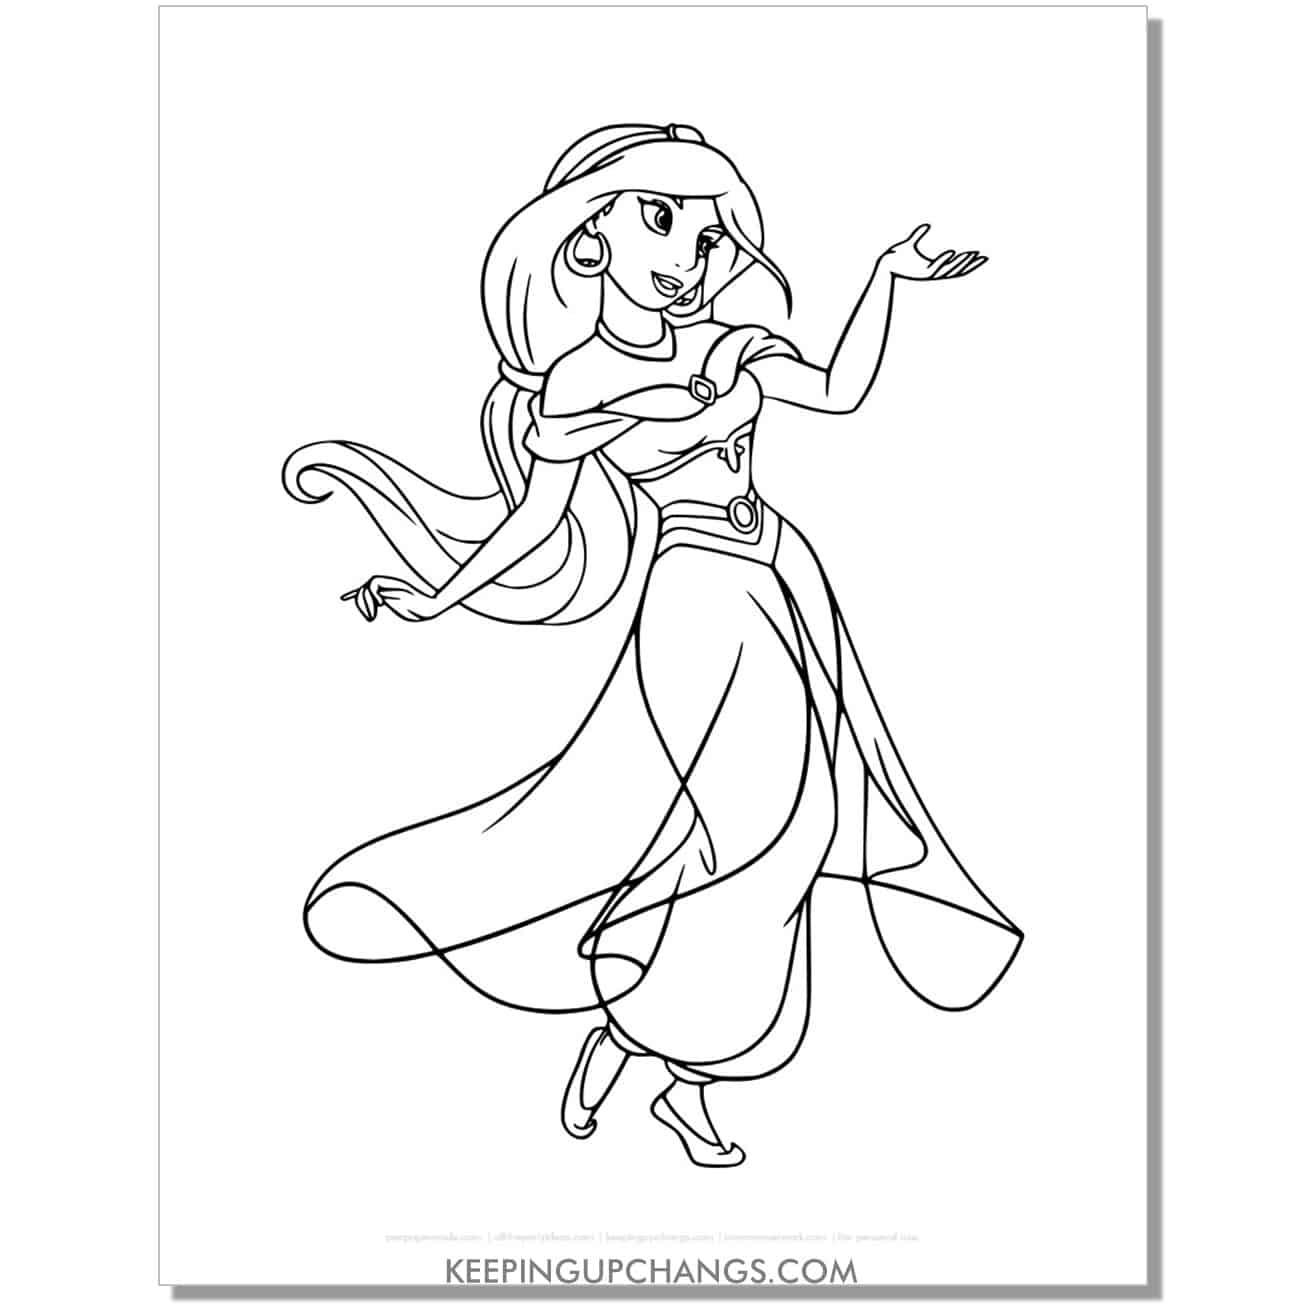 jasmine dancing with palm up coloring page, sheet.